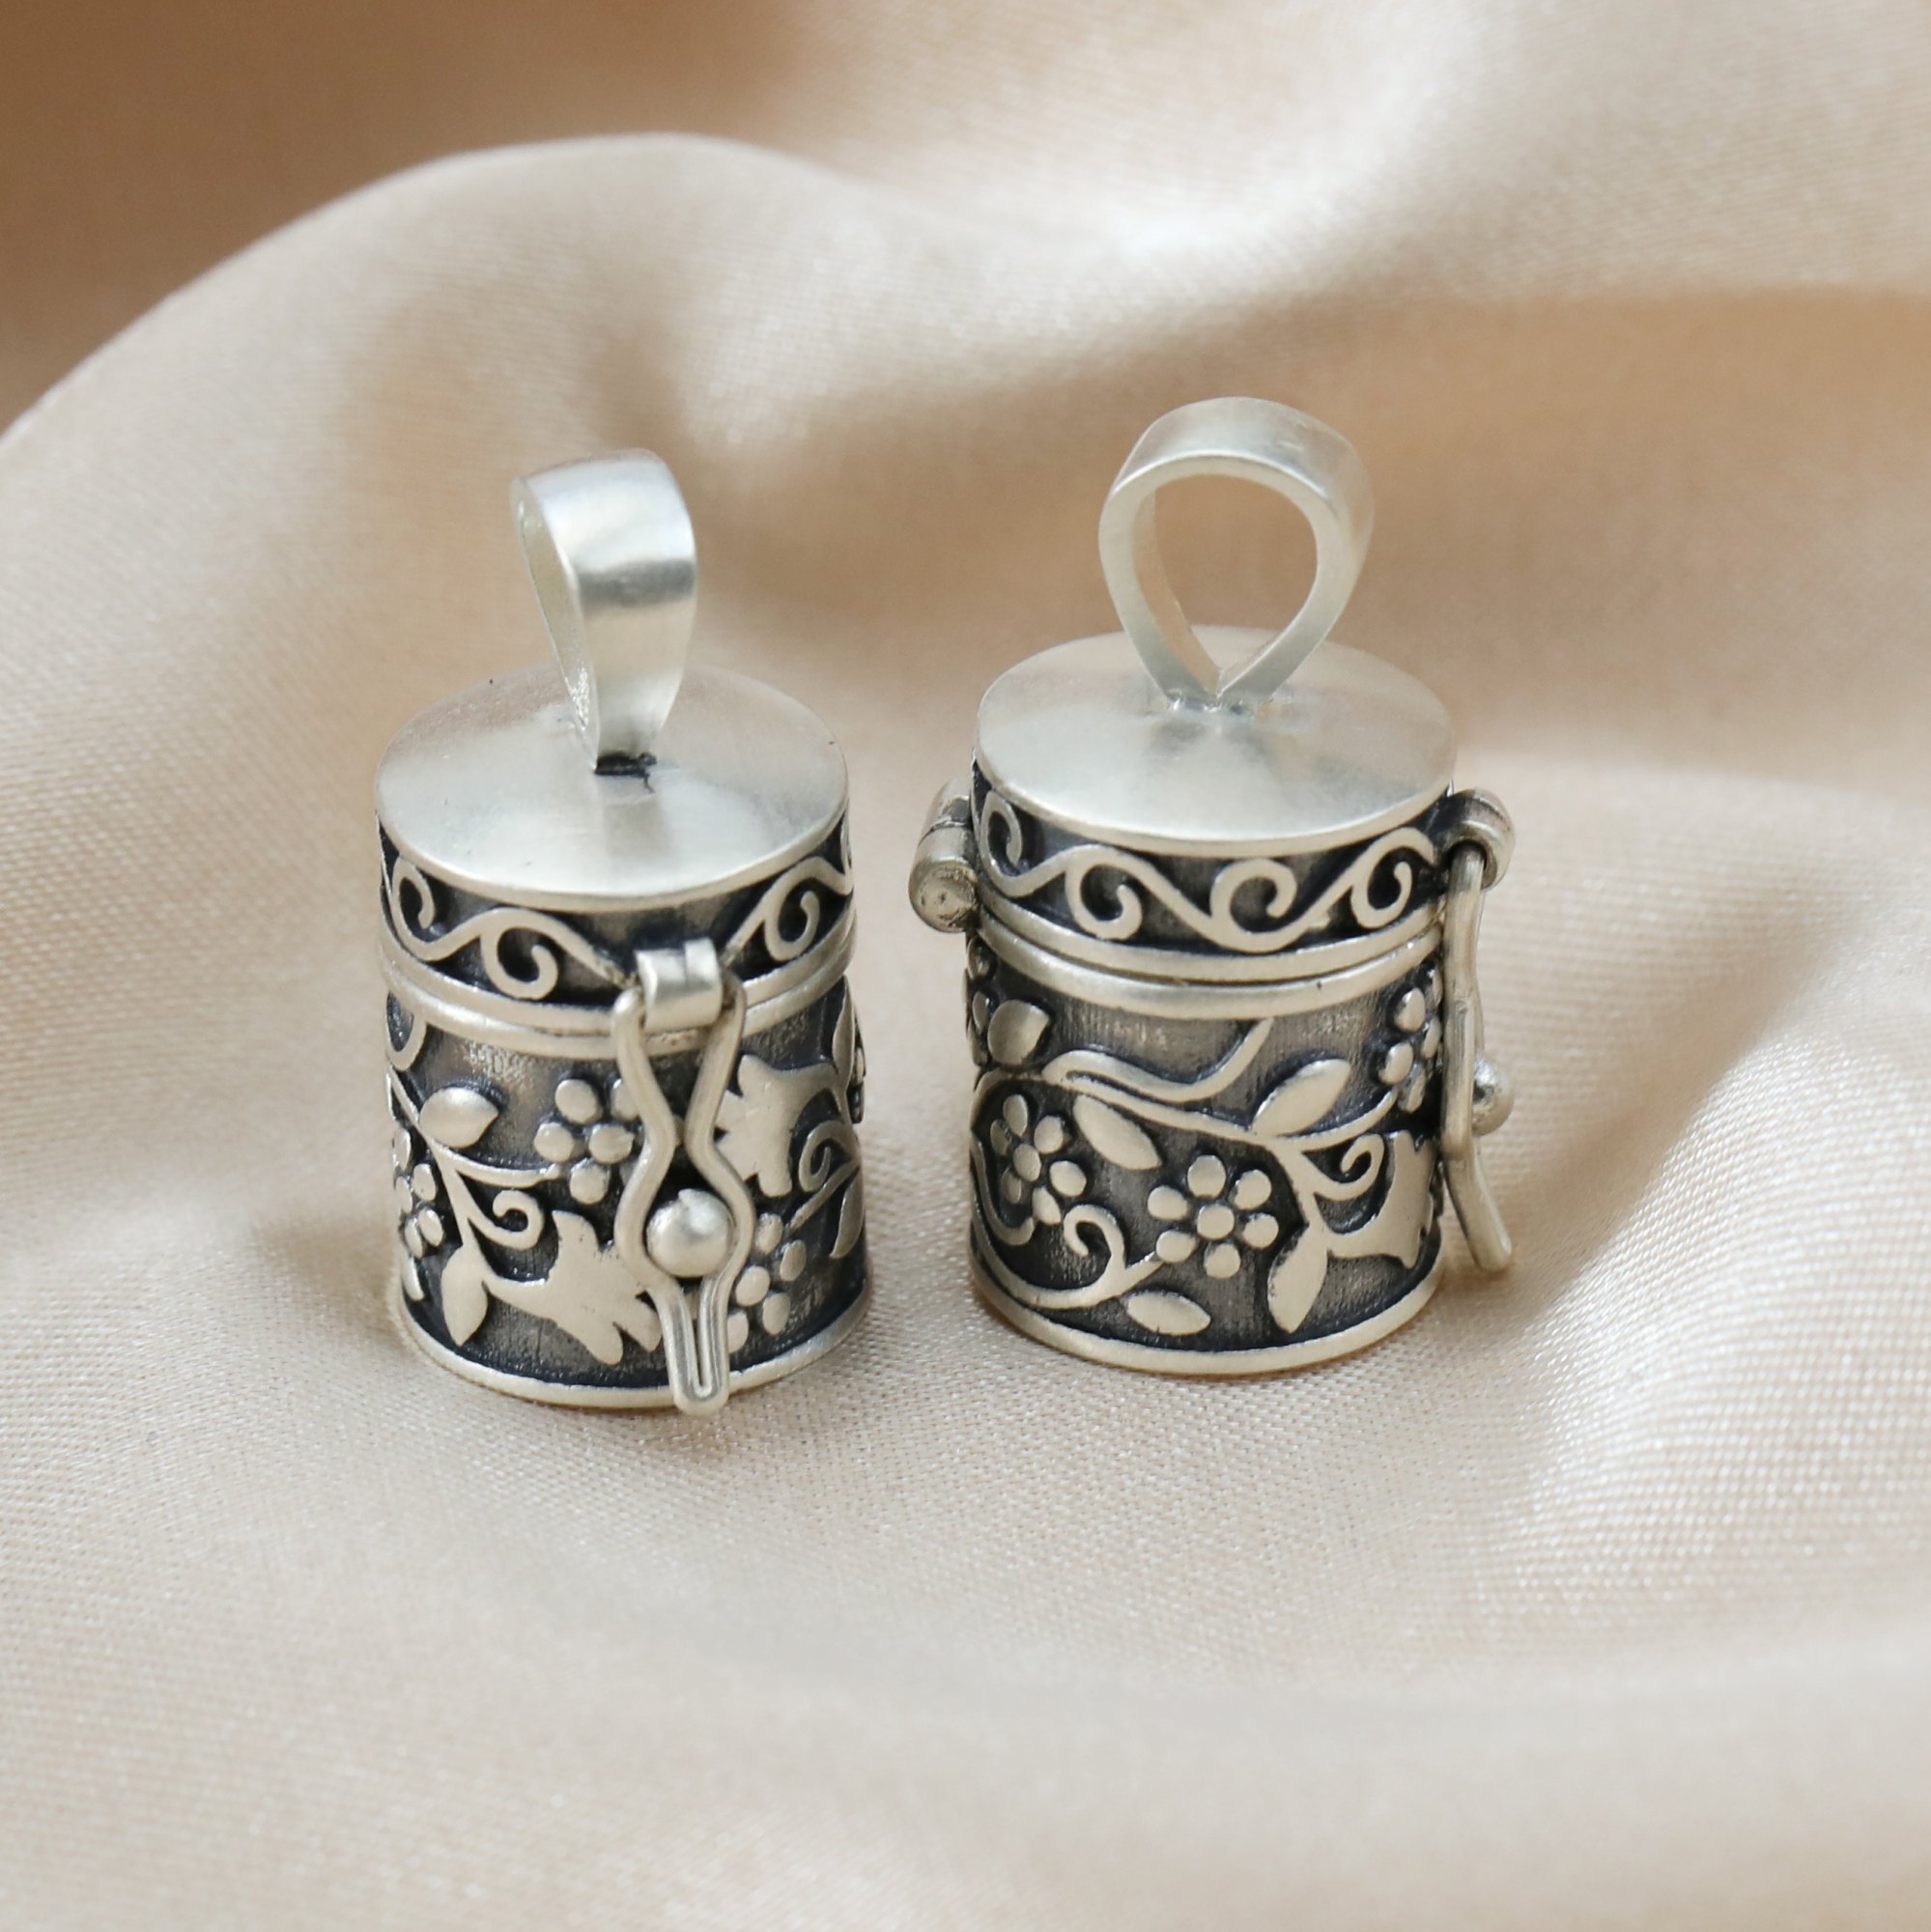 Keepsake Ash Canister Cremation Urn Solid 925 Sterling Silver Wish Vial Pendant Prayer Box Antiqued Silver 11x22MM 1190047 - Click Image to Close